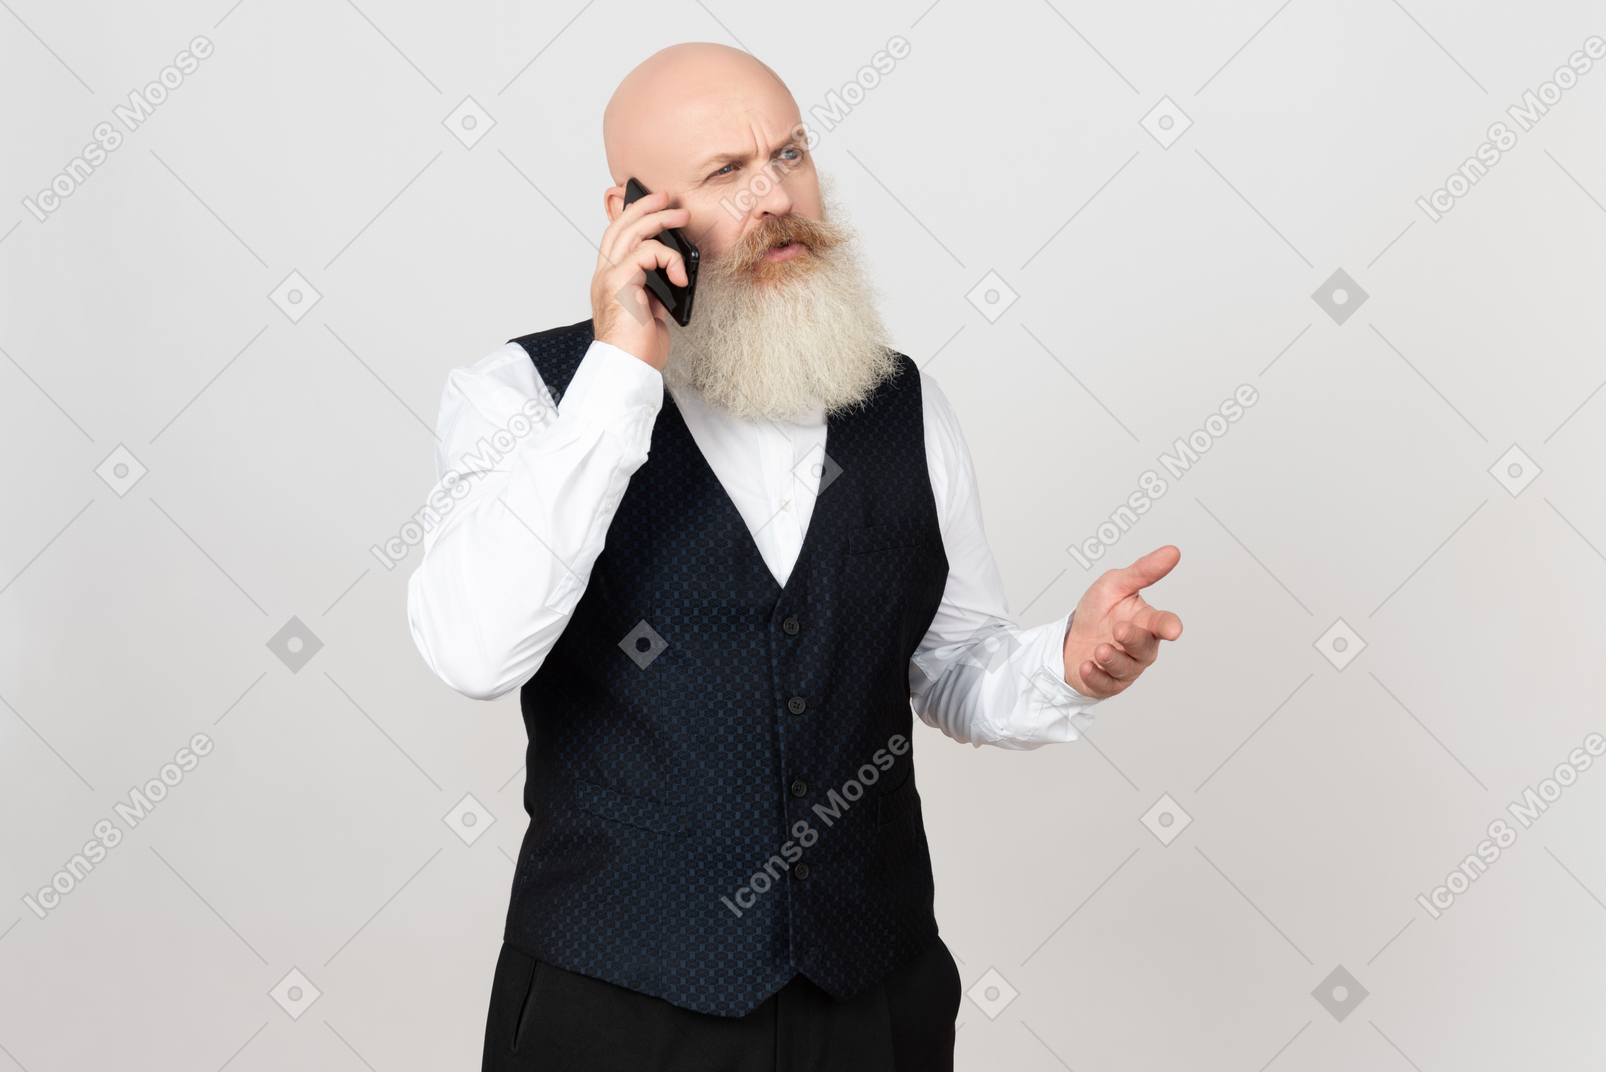 Aged man looks totally involved in phone talk